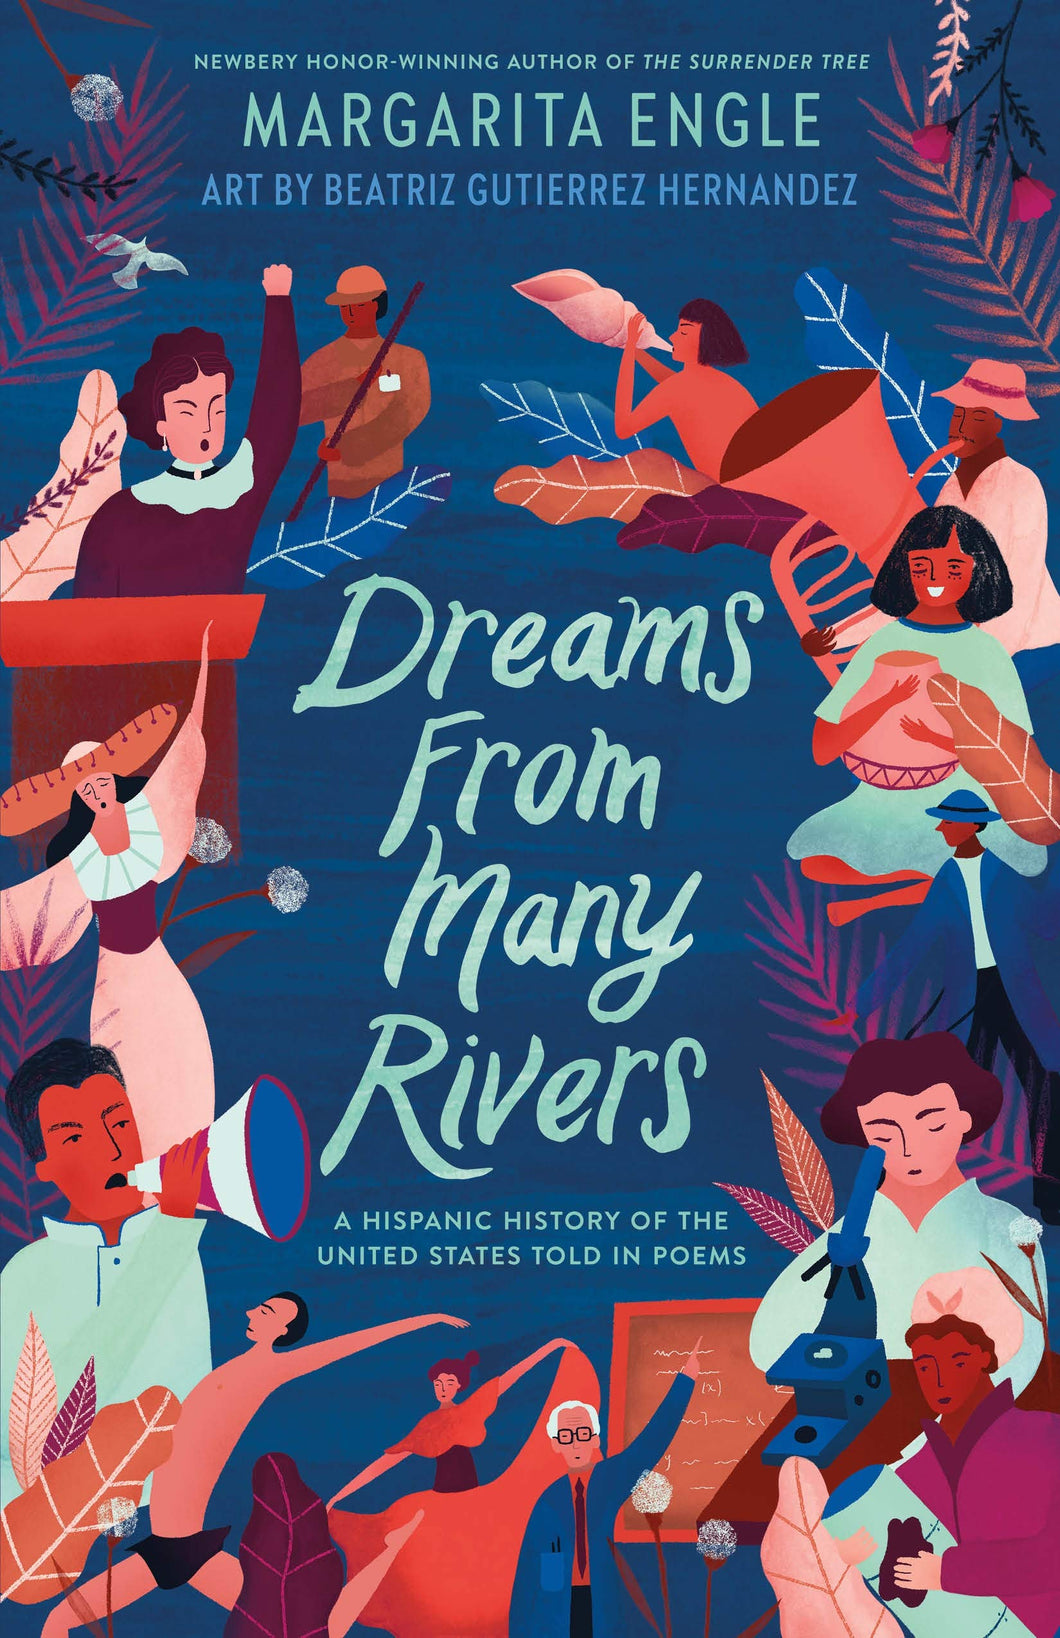 Dreams from Many Rivers: A Hispanic History of the United States Told in Poems by Margarita Engle, Beatriz Gutierrez Hernandez